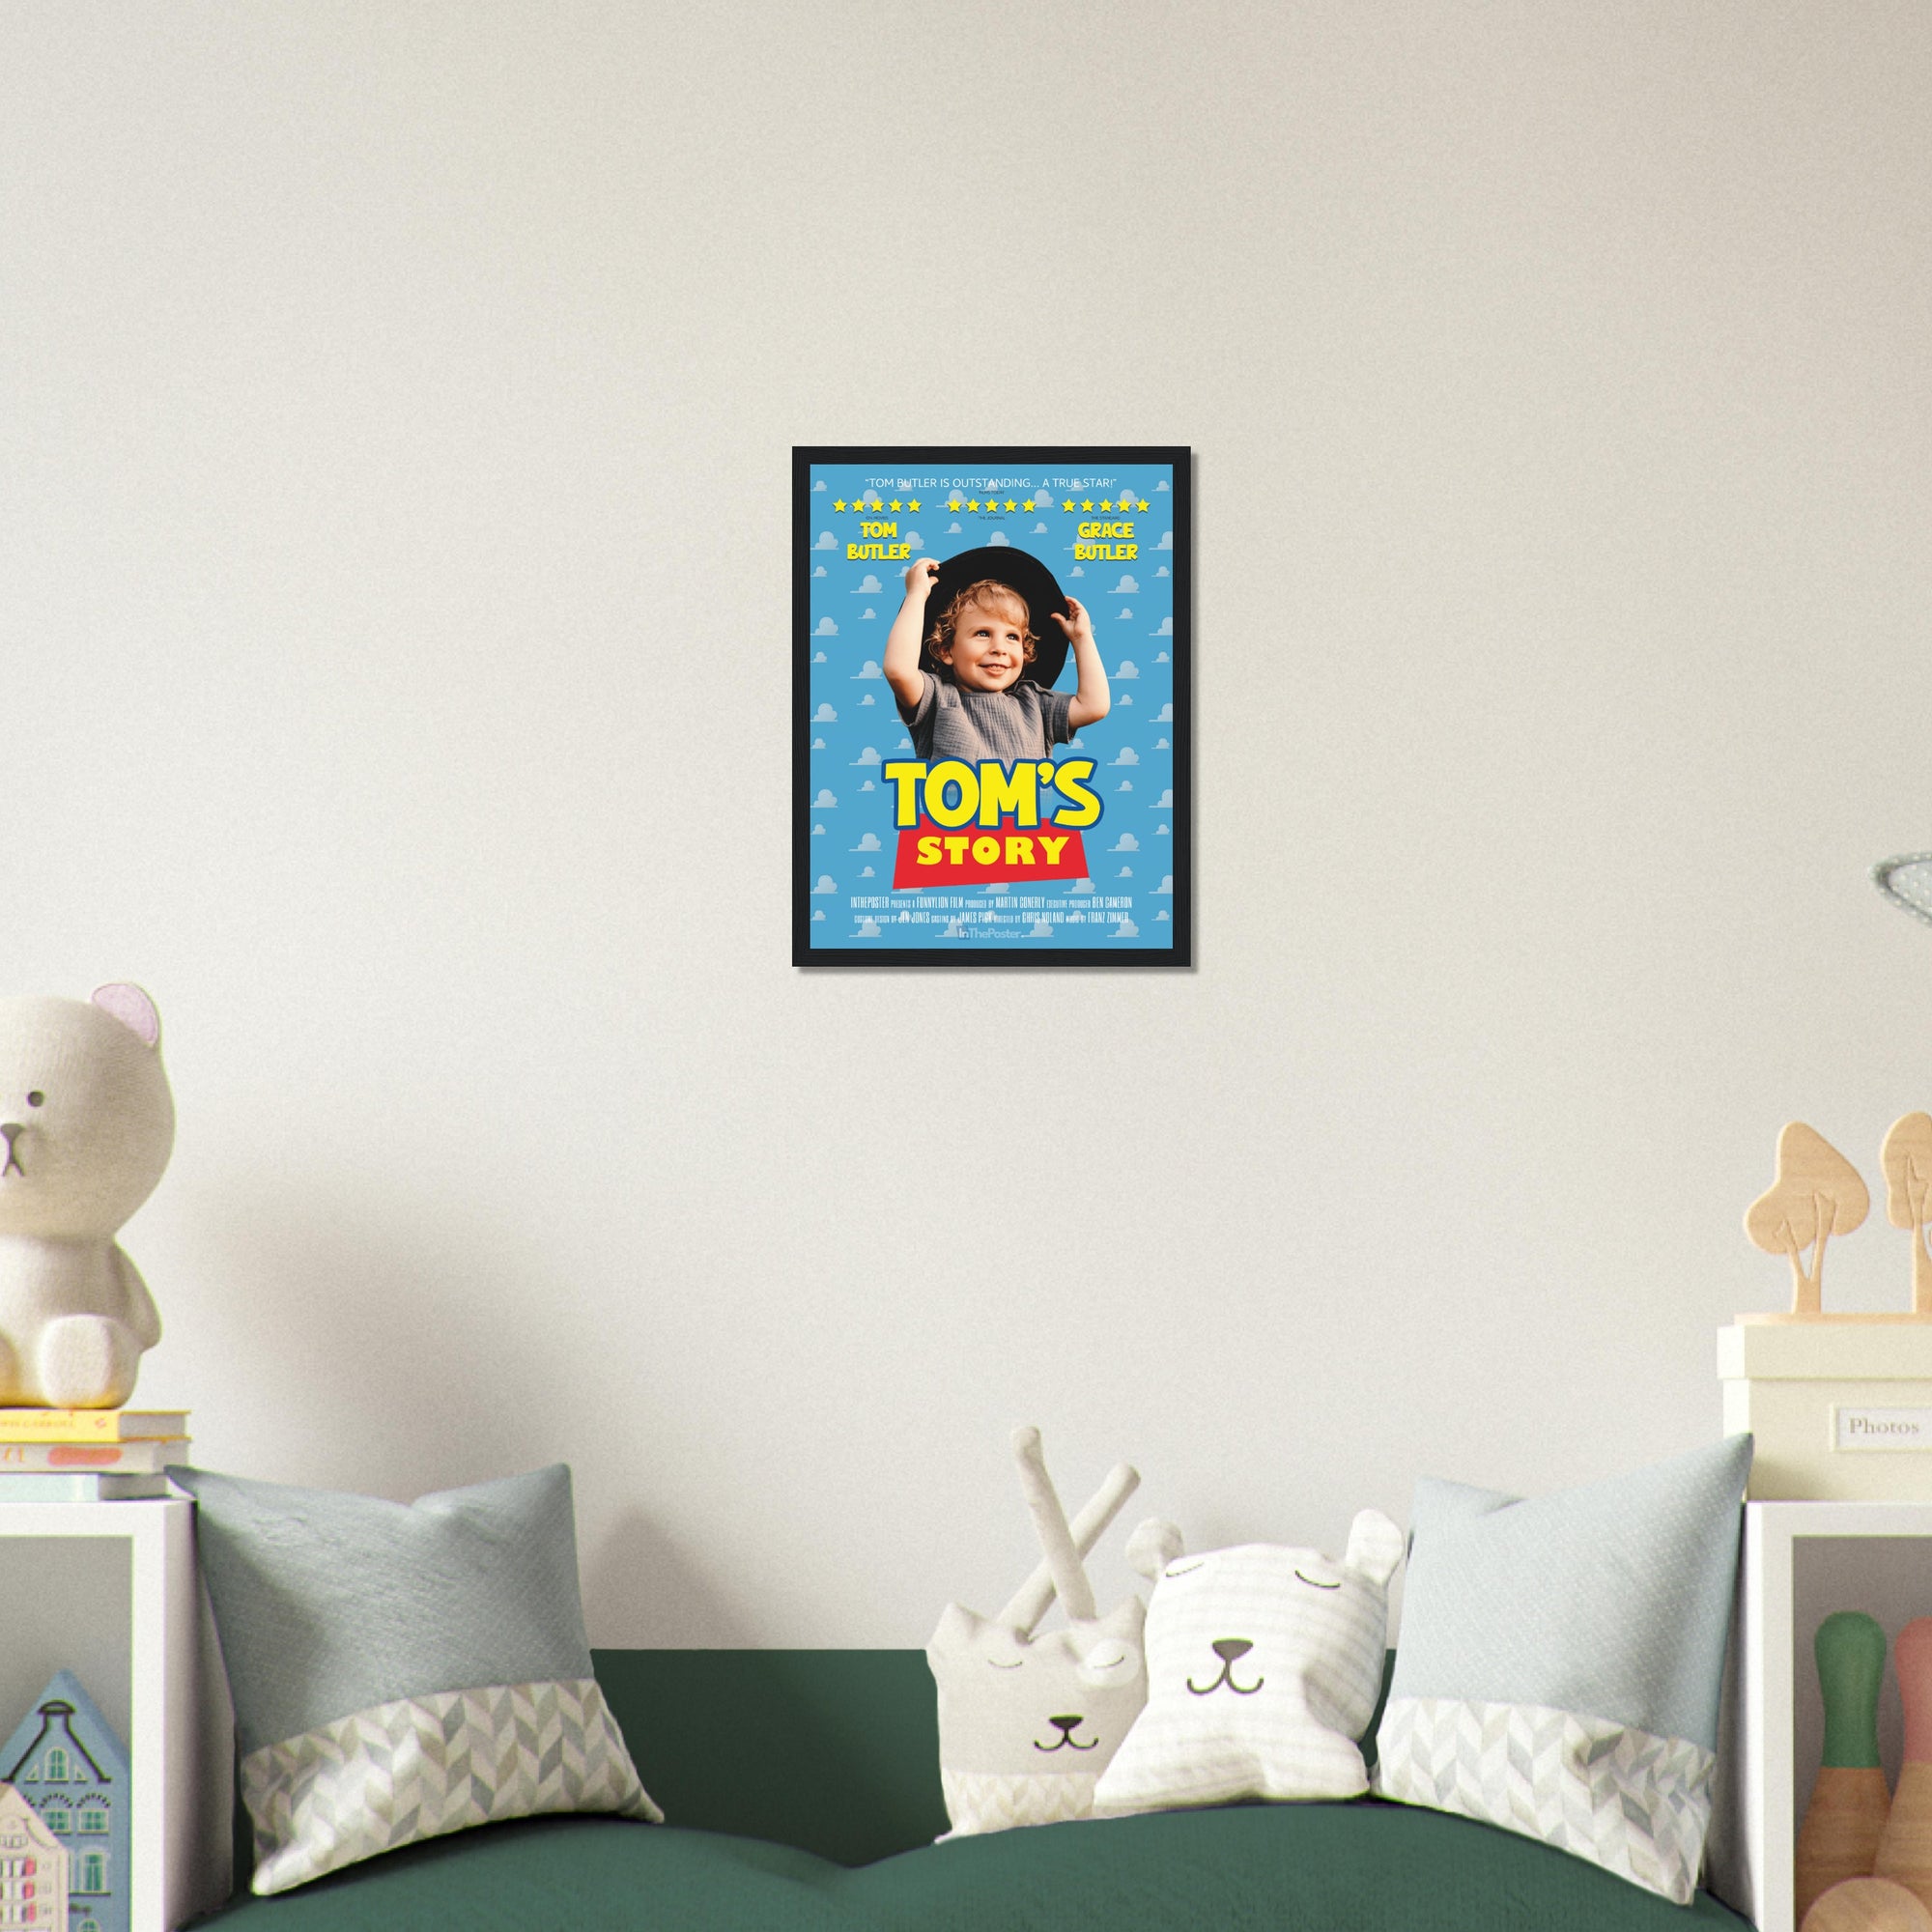 A Toy Story inspired movie poster design in a small black frame, on a grey wall in a kids bedroom